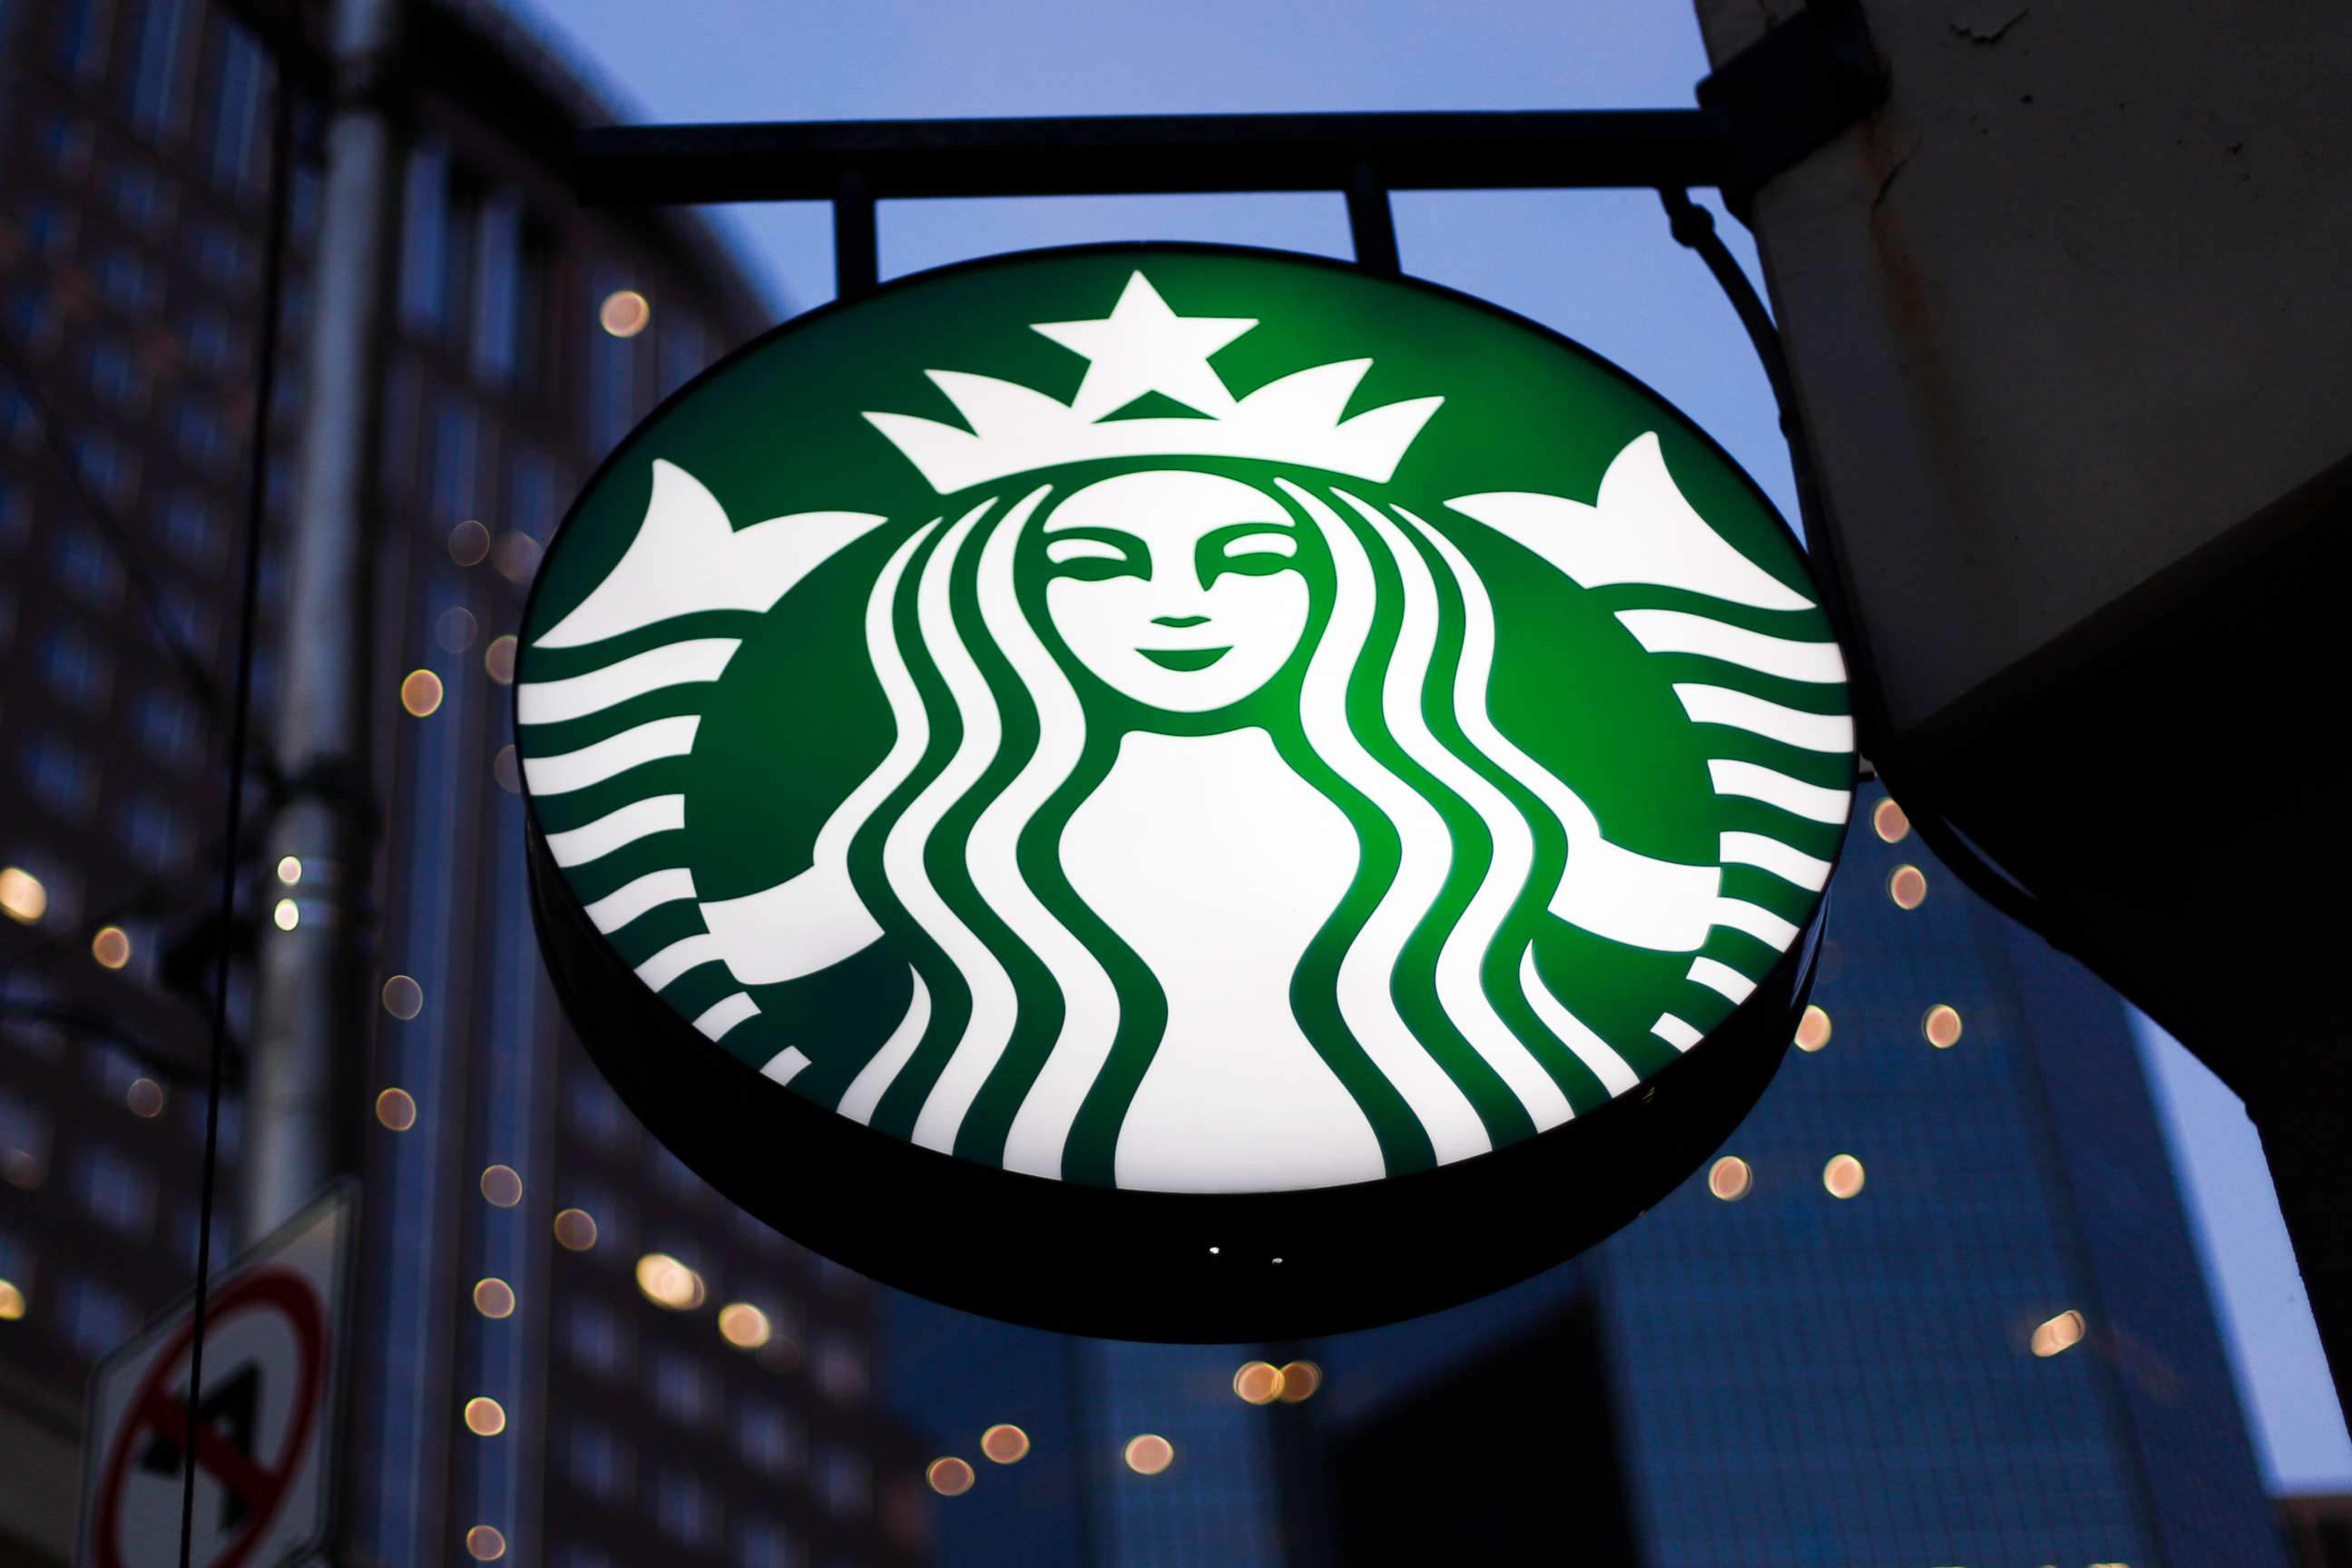 PHOTO: FILE - This June 26, 2019 file photo shows a the Starbucks sign outside a Starbucks coffee shop in downtown Pittsburgh.  